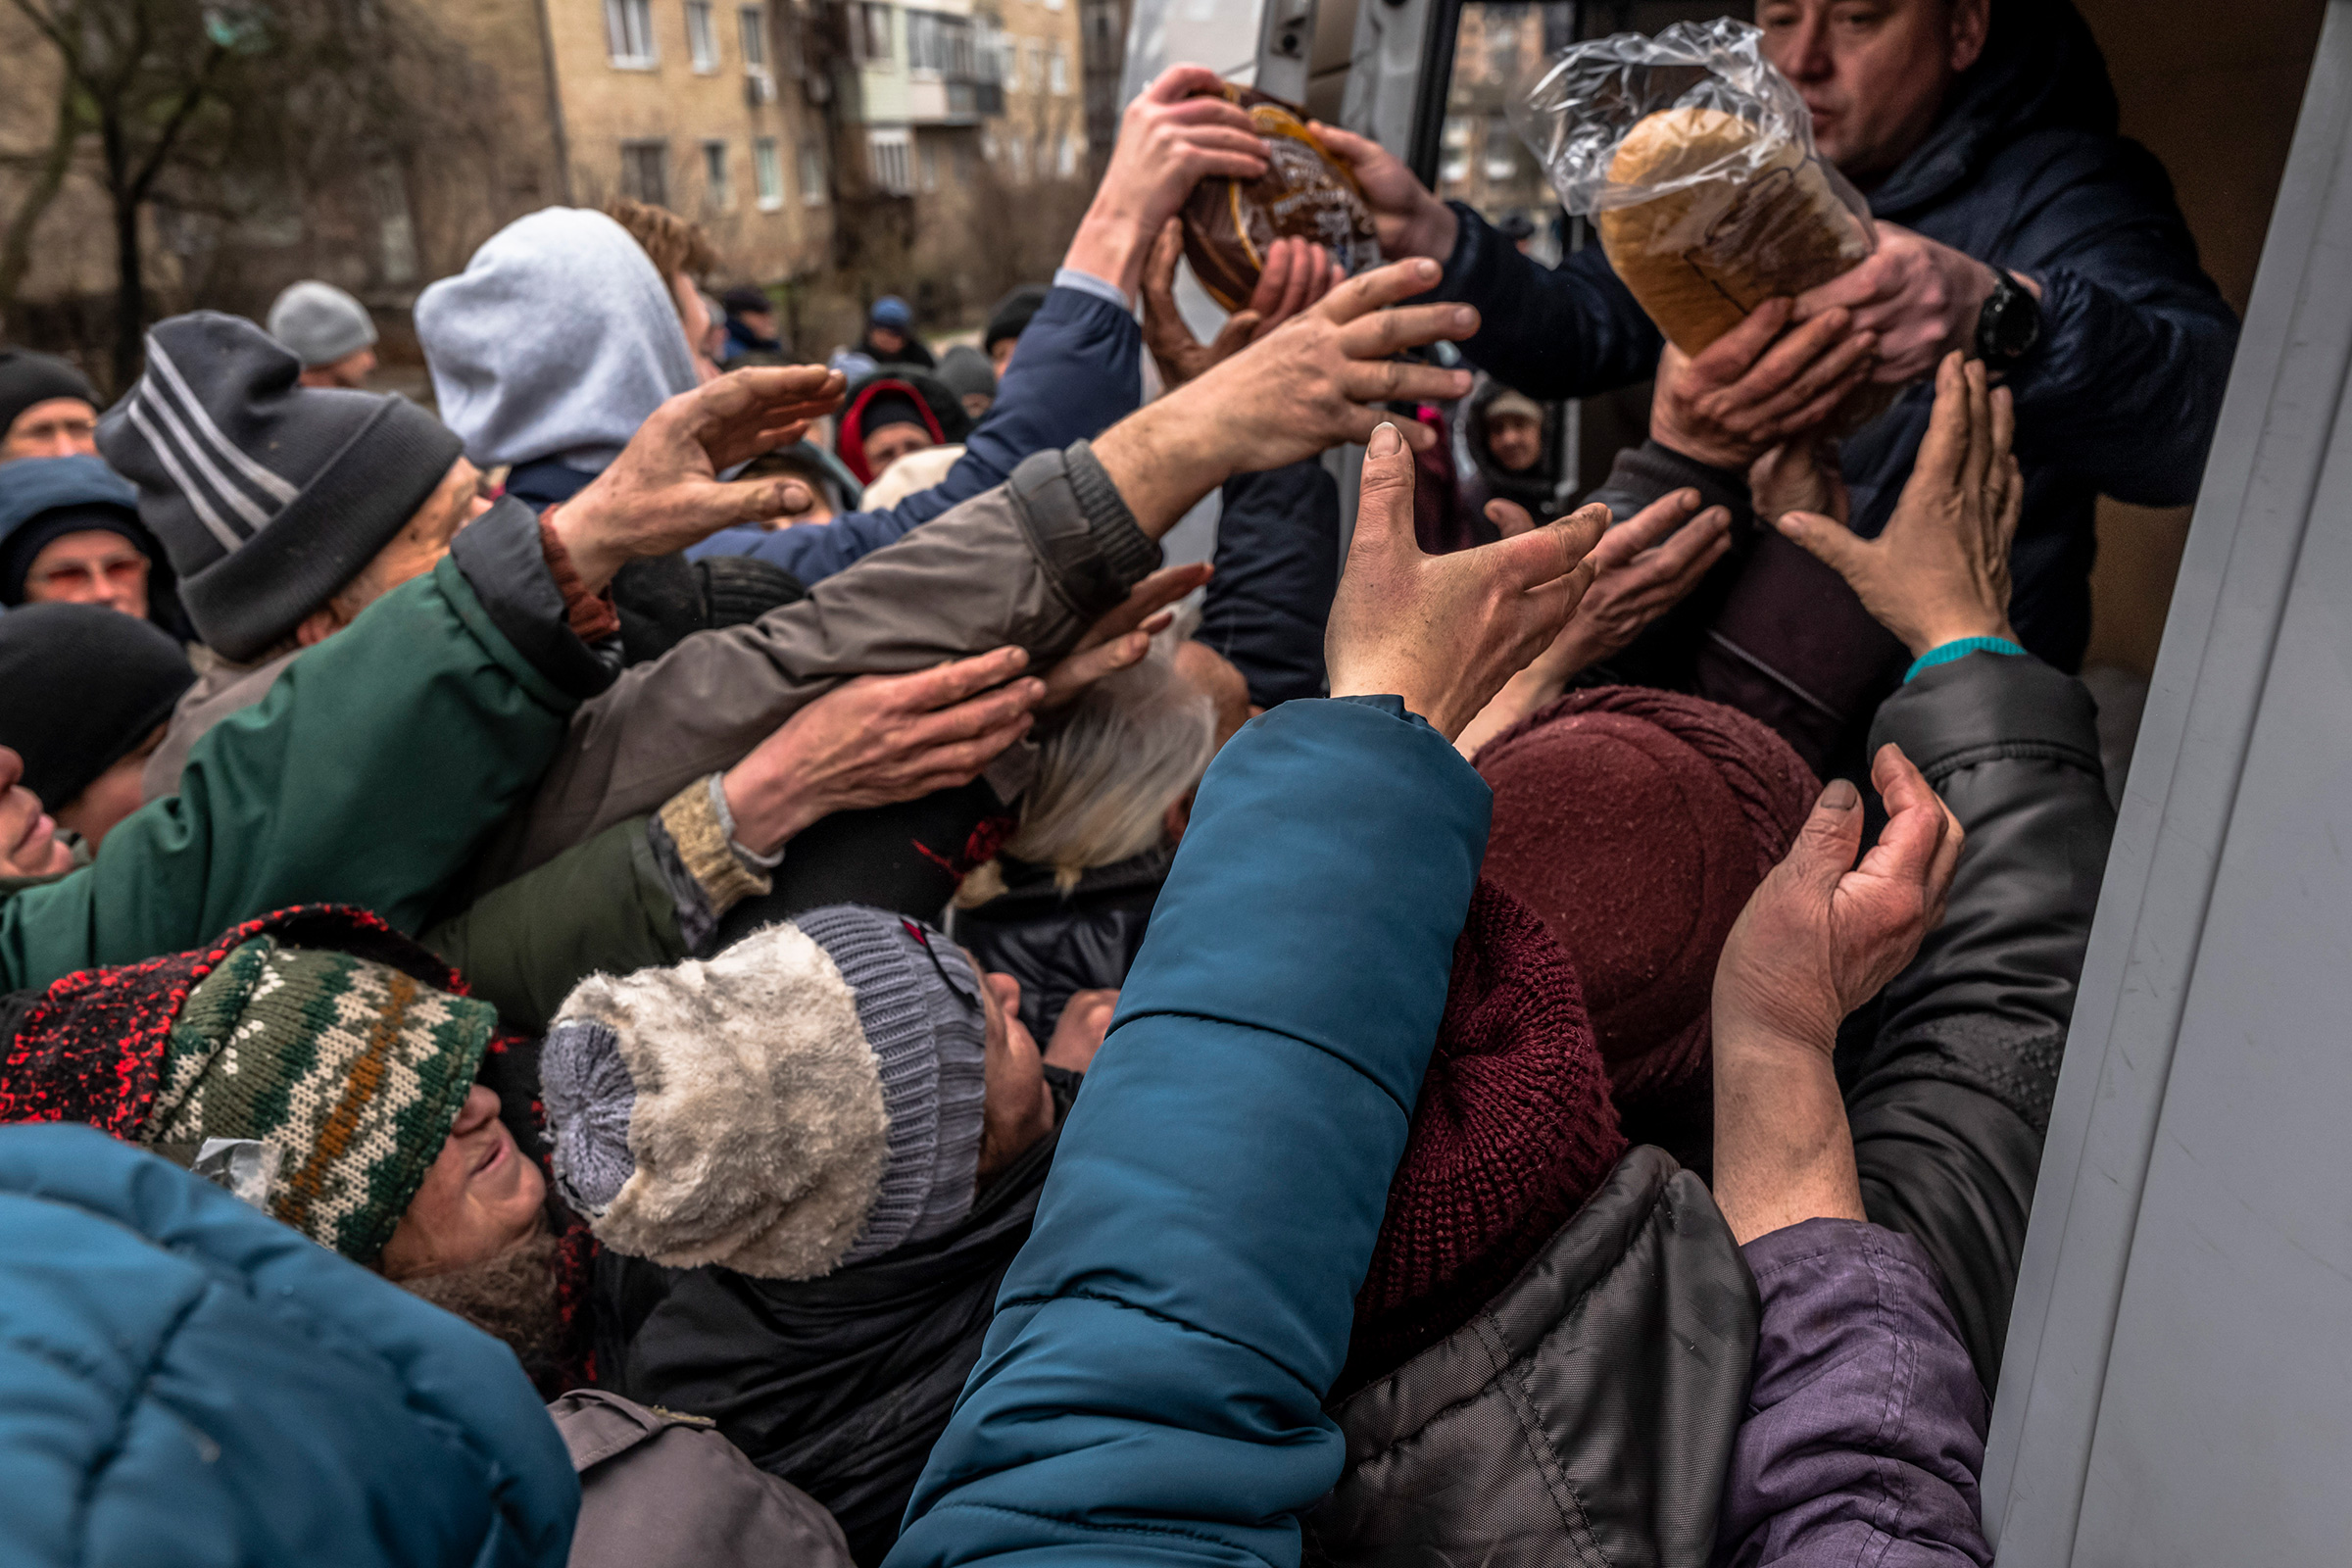 Residents reach for food being distributed by soldiers from the Azov battalion, a Ukrainian paramilitary, in Bucha, a recently-liberated town northwest of Kyiv, Ukraine, on April 2, 2022.